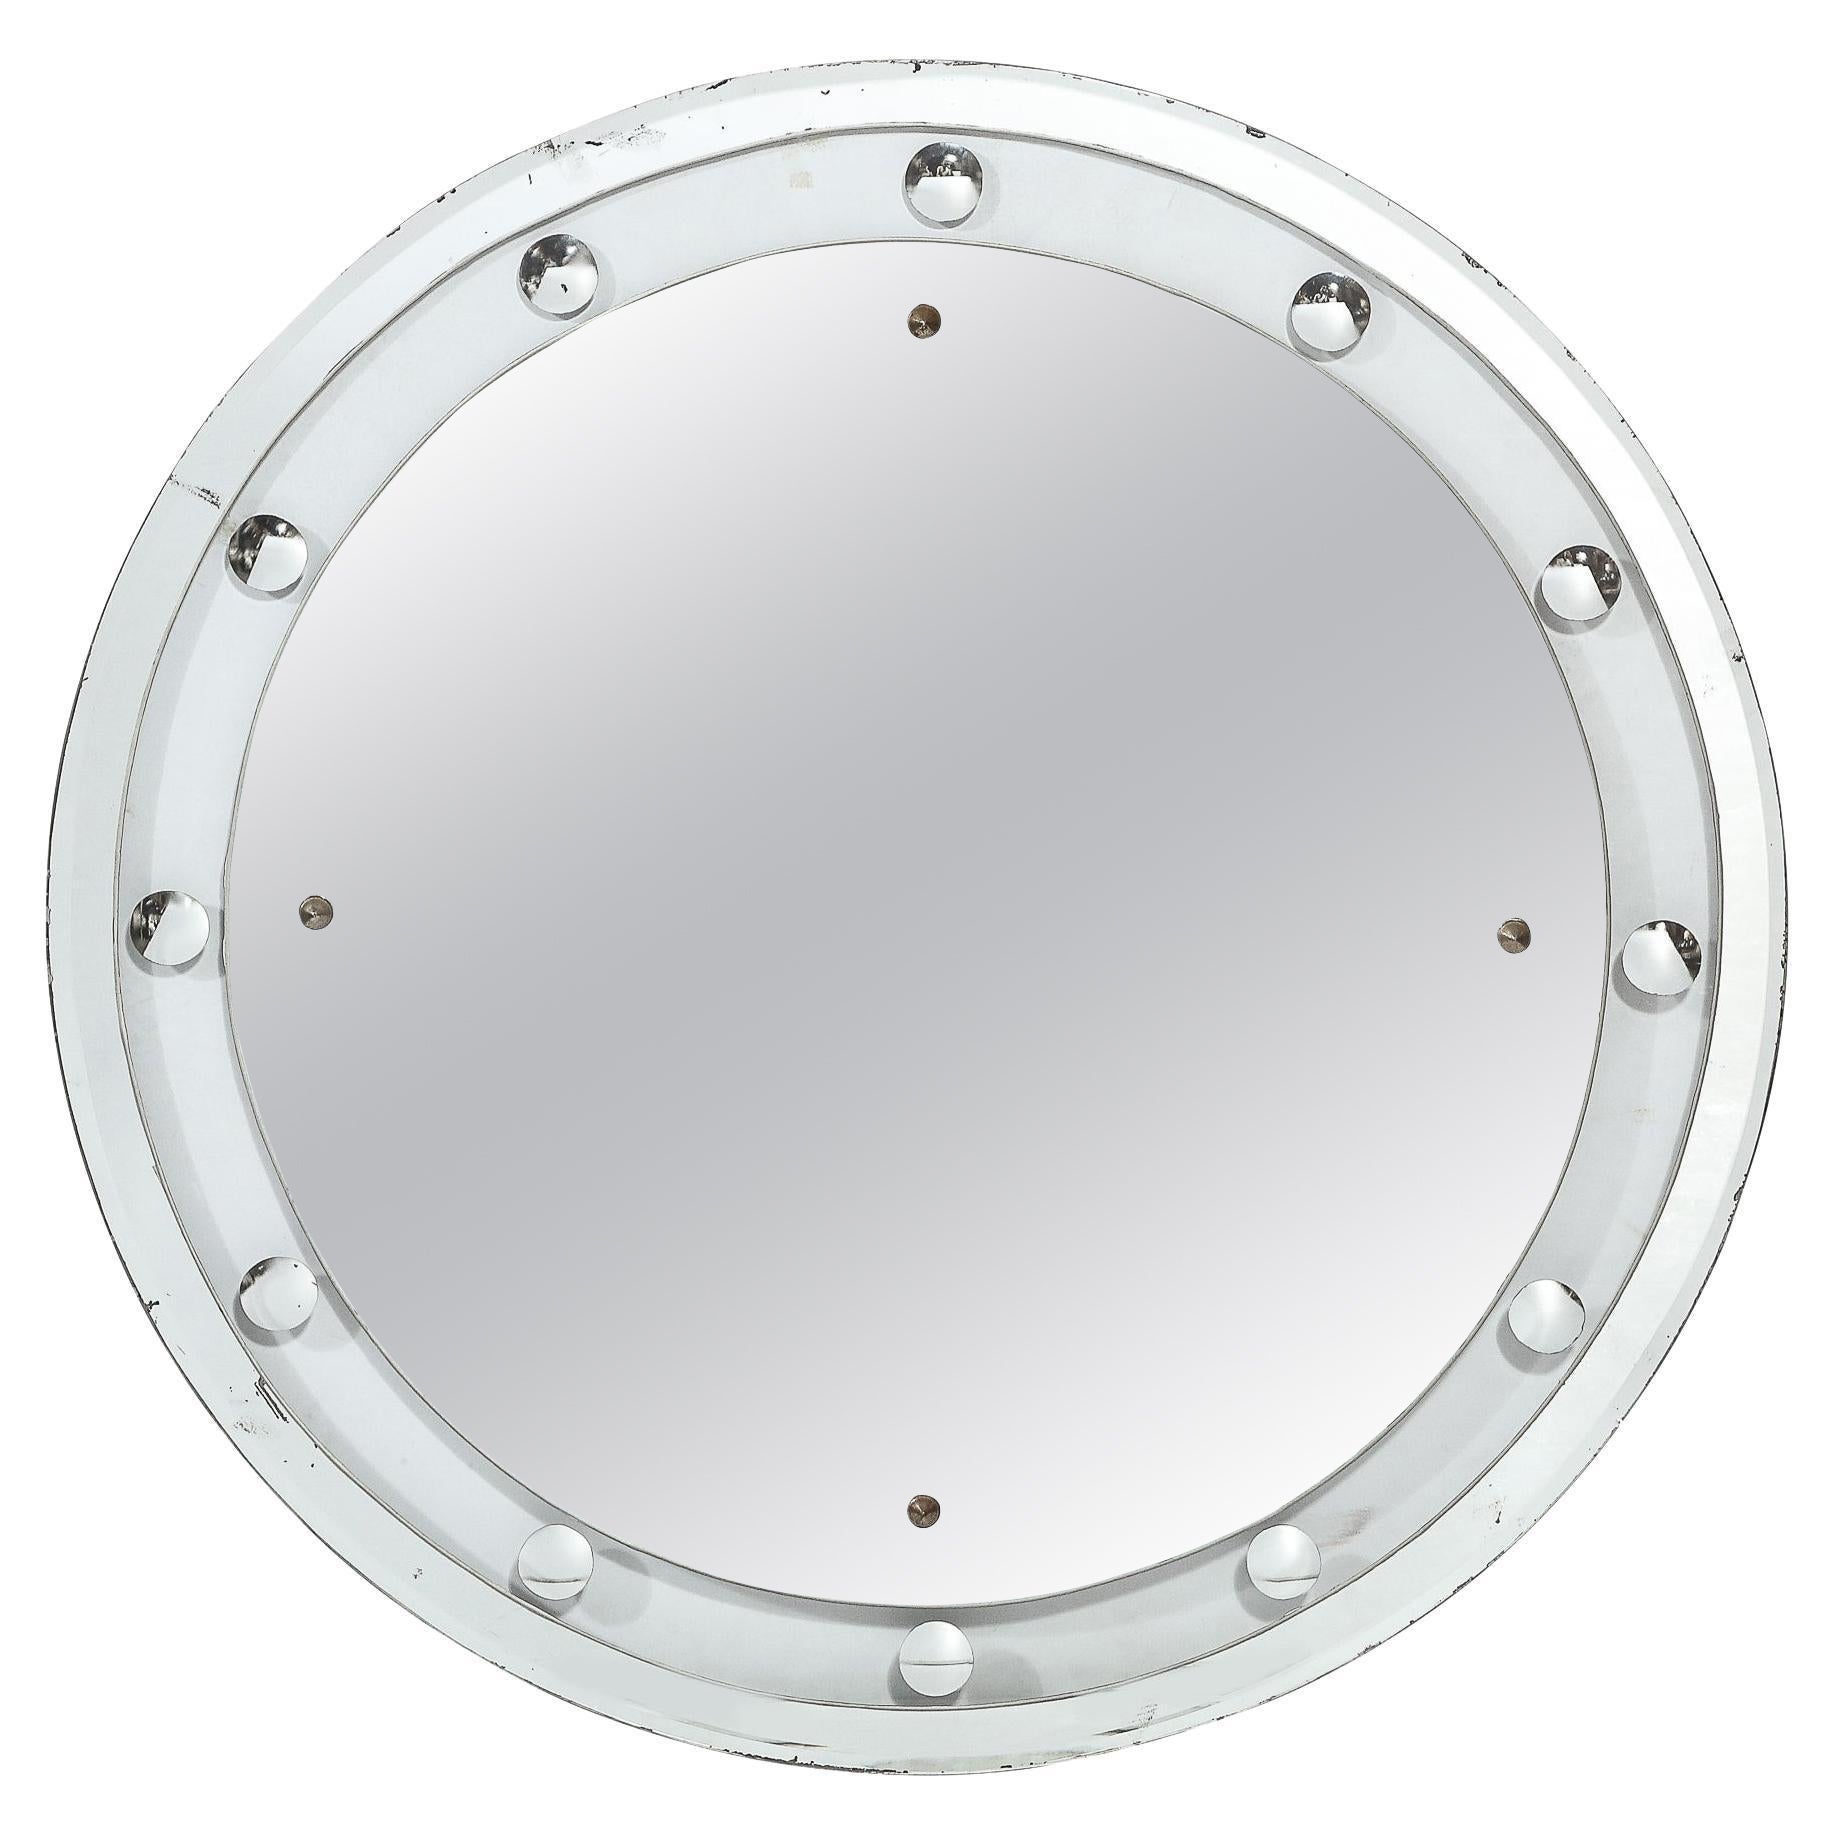 Art Deco Machine Age Floating Edge Round Banded Mirror W/ Reverse Bevel Details  For Sale